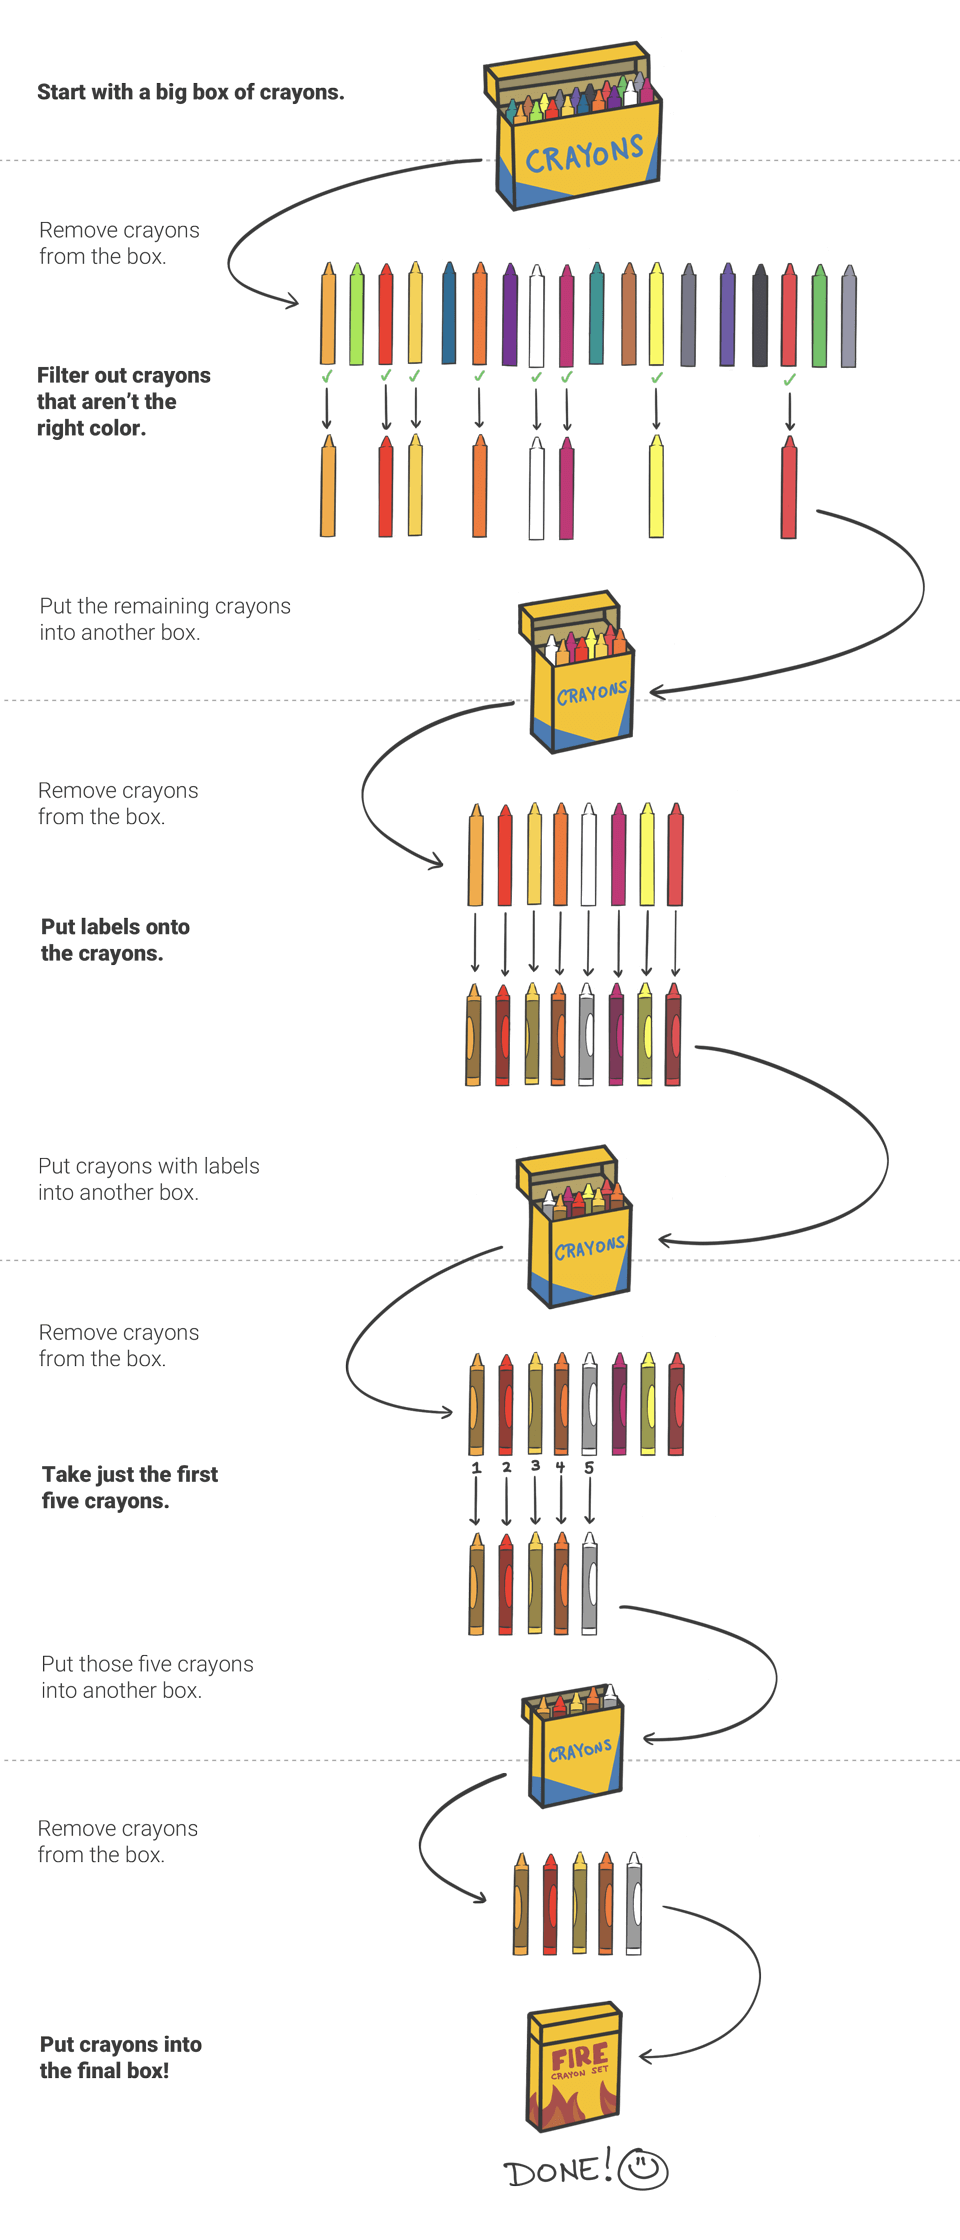 Diagram depicting an inefficient crayon process - starting with a big box of crayons, filtering by color, labeling the crayons, taking the first five crayons, and boxing them up.